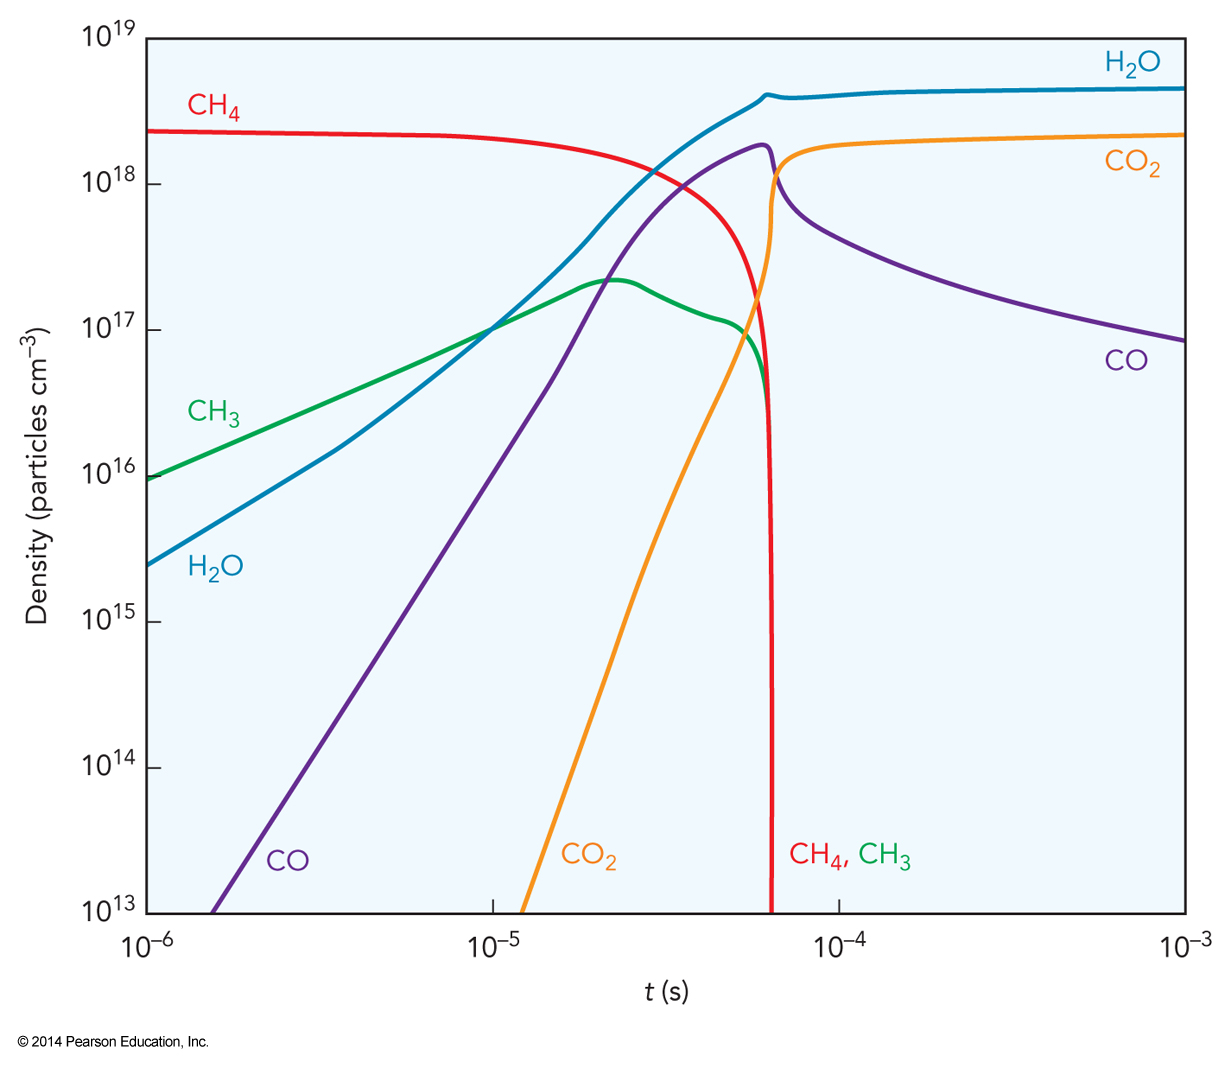 a Log-log plot of density versus time for several compounds involved in the combustion of methane at 2000 K.